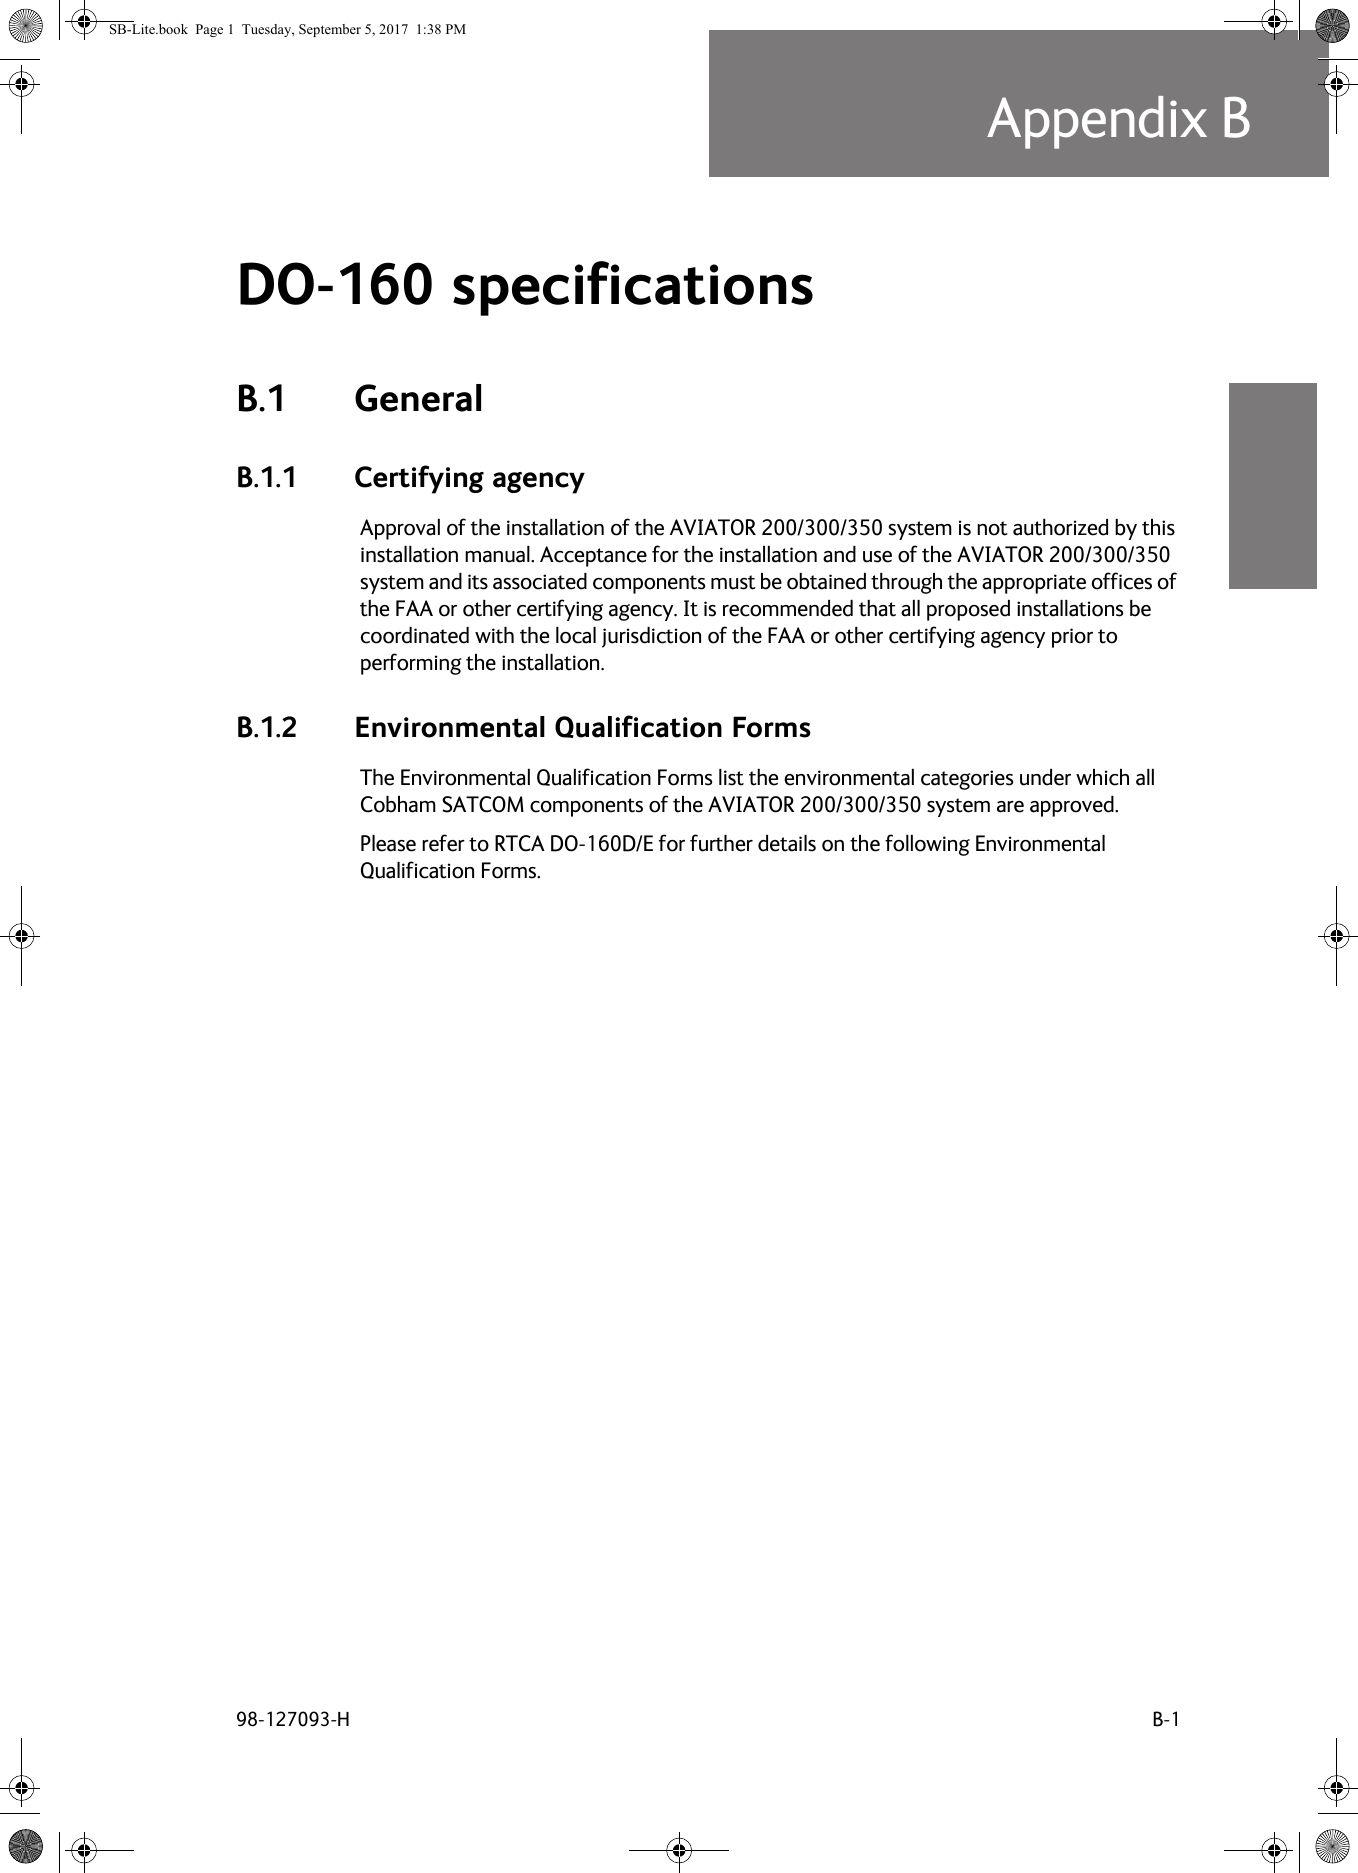 98-127093-H B-1Appendix BBBBBDO-160 specifications BB.1 GeneralB.1.1 Certifying agencyApproval of the installation of the AVIATOR  200/300/350 system is not authorized by this installation manual. Acceptance for the installation and use of the AVIATOR  200/300/350 system and its associated components must be obtained through the appropriate offices of the FAA or other certifying agency. It is recommended that all proposed installations be coordinated with the local jurisdiction of the FAA or other certifying agency prior to performing the installation.B.1.2 Environmental Qualification FormsThe Environmental Qualification Forms list the environmental categories under which all Cobham SATCOM components of the AVIATOR  200/300/350 system are approved.Please refer to RTCA DO-160D/E for further details on the following Environmental Qualification Forms.SB-Lite.book  Page 1  Tuesday, September 5, 2017  1:38 PM